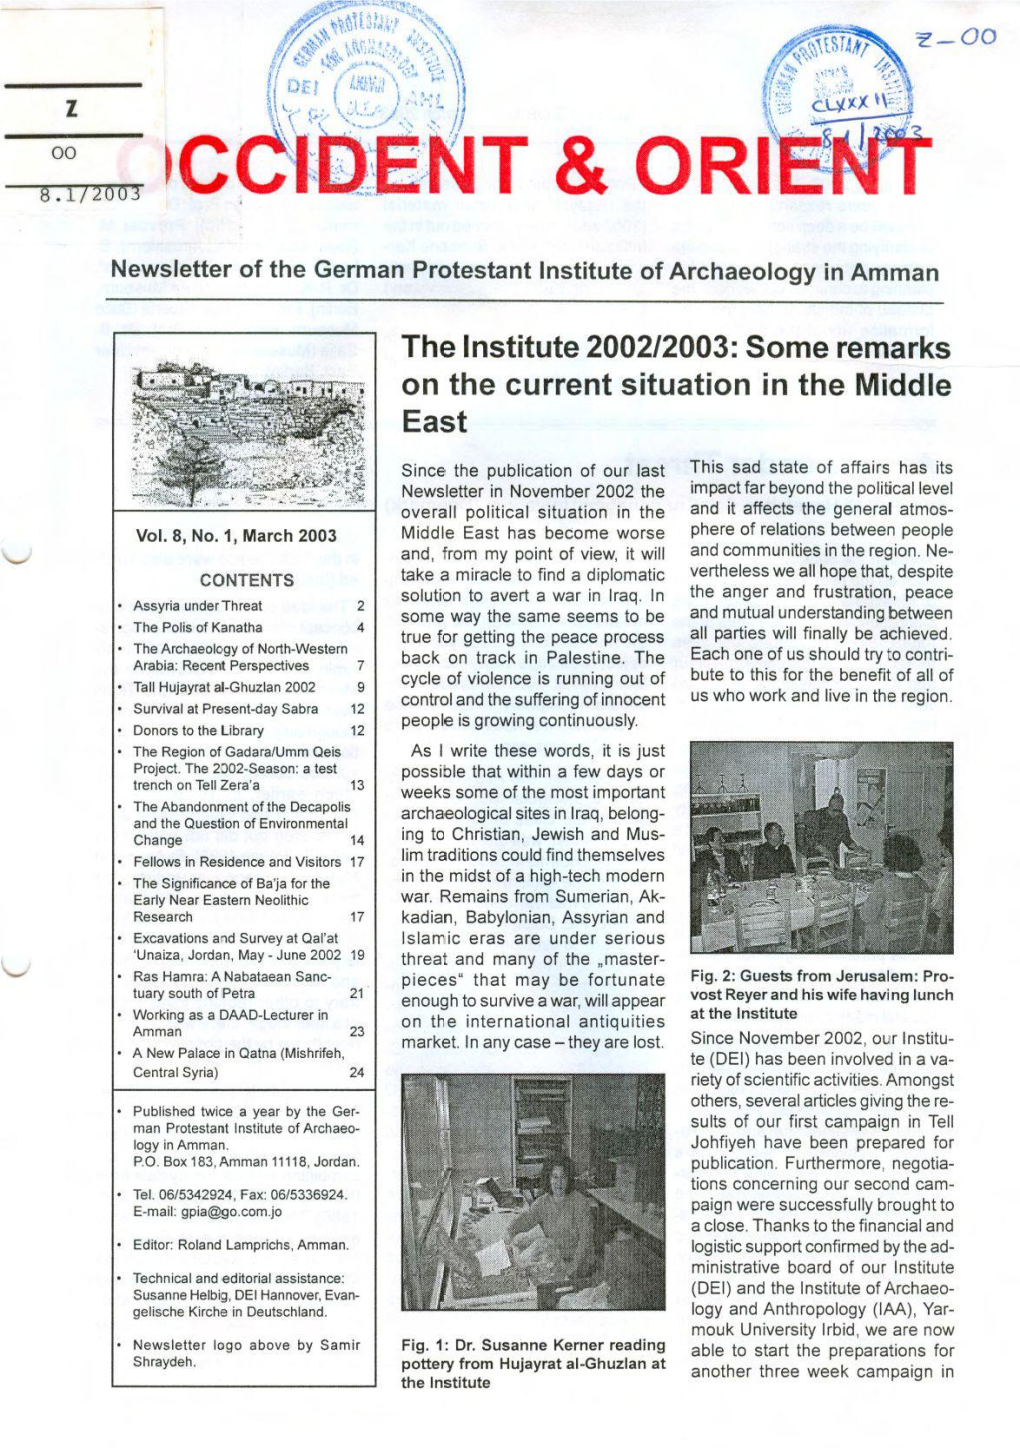 The Institute 2002/2003: Some Remarks on the Current Situation in the Middle East